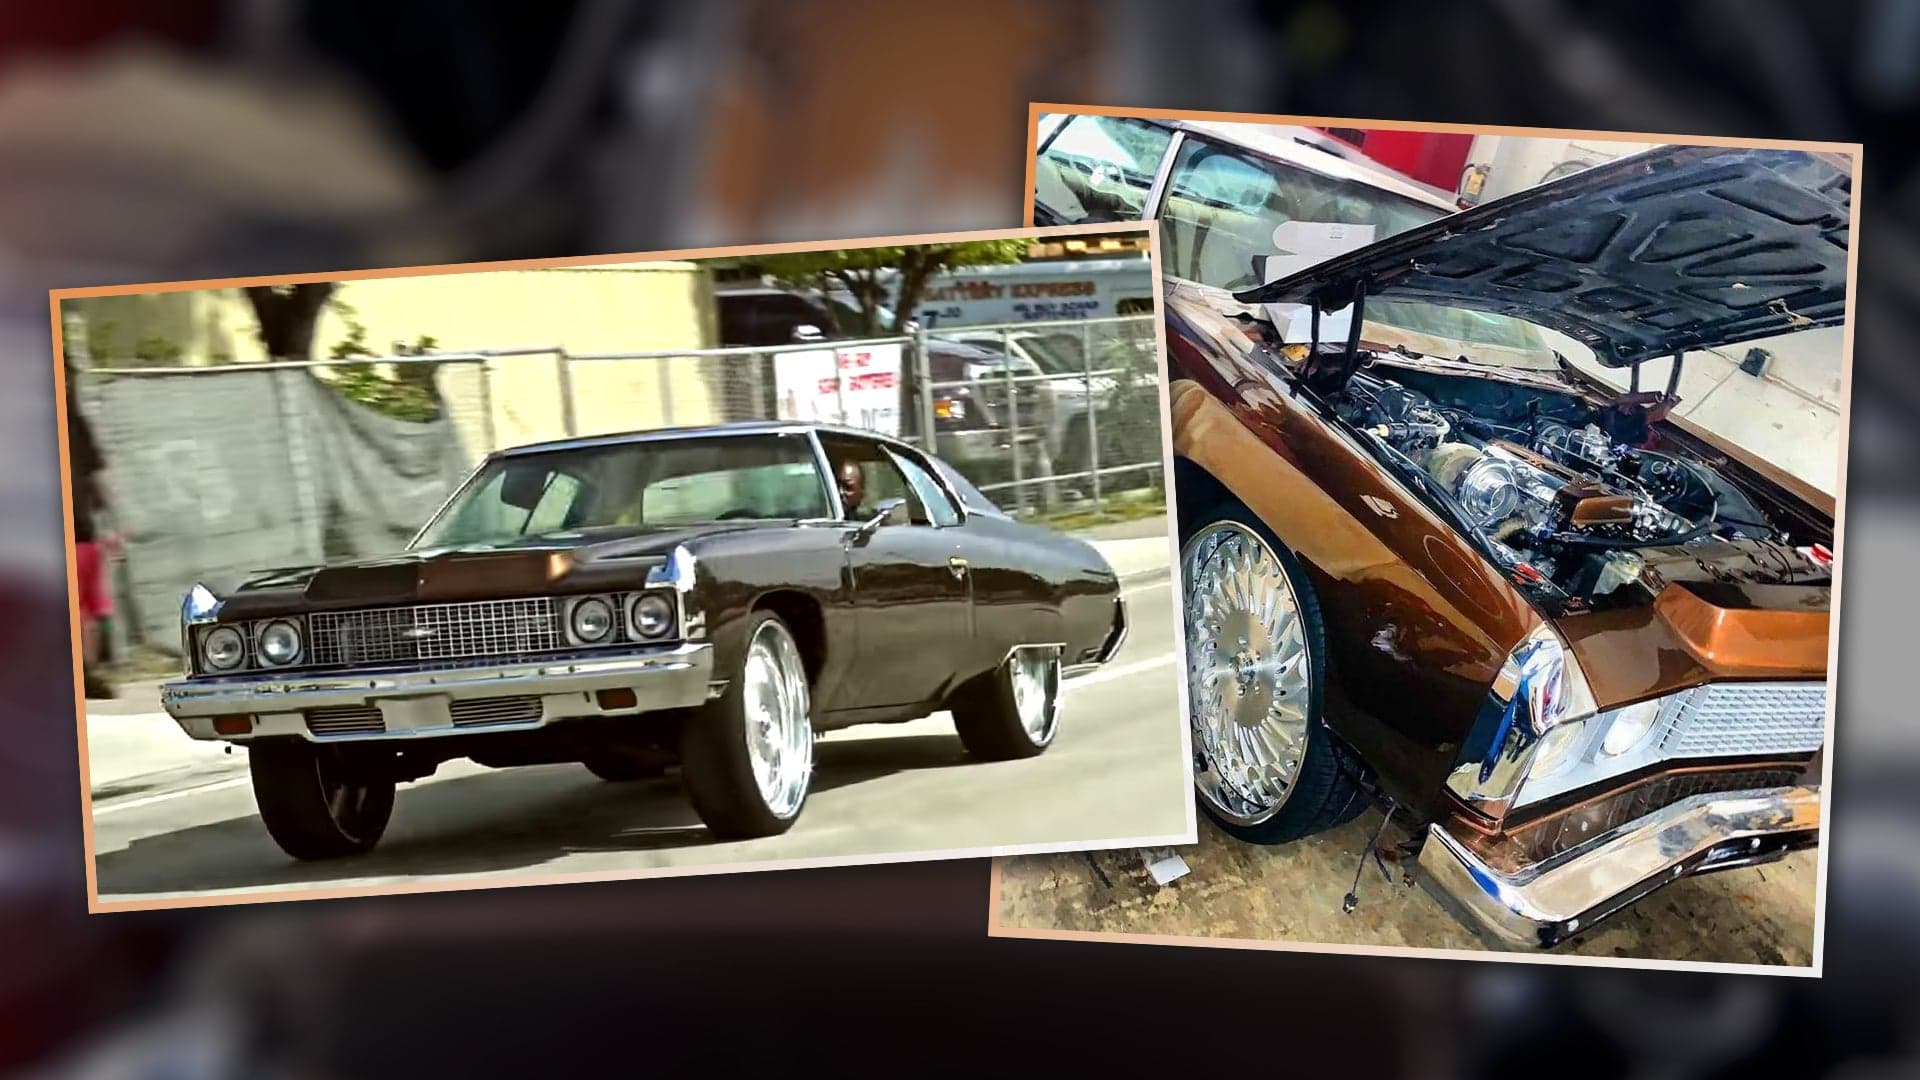 This Supra 2JZ-Swapped 1973 Chevrolet Impala Donk Is a Cultural Crossover